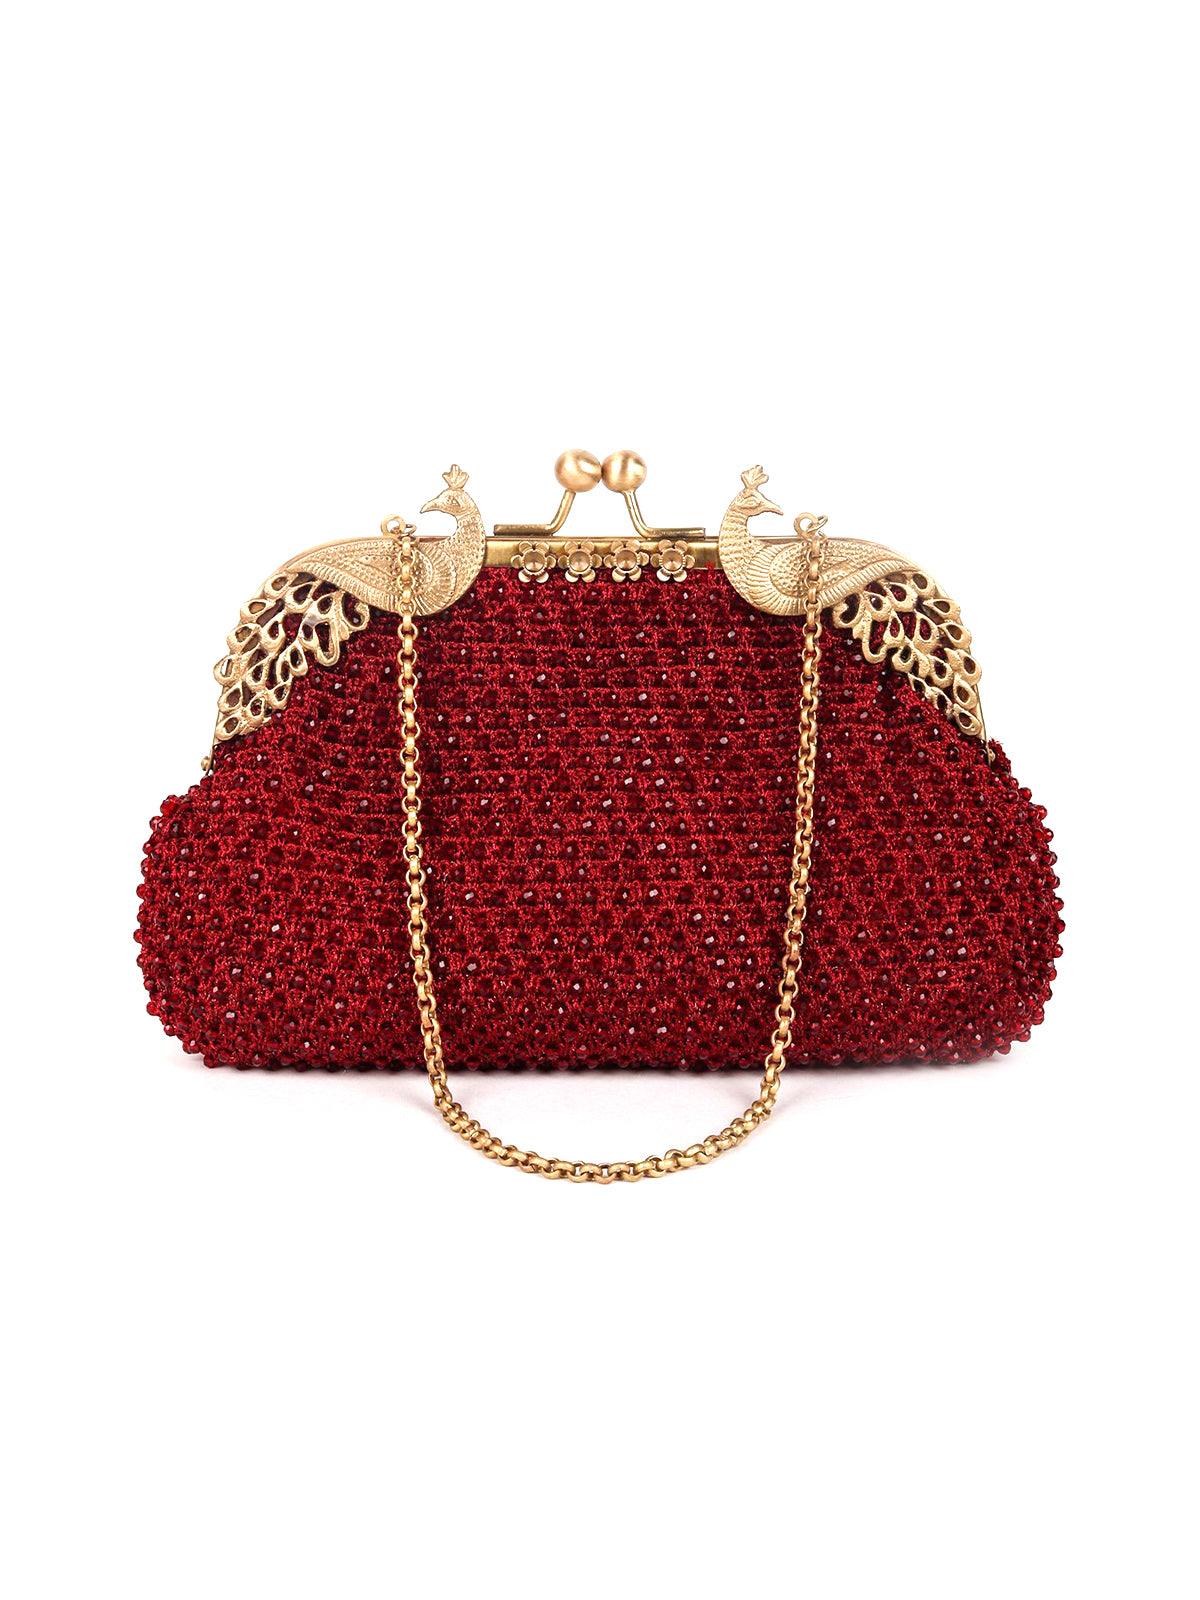 Peacock curved shinny maroon clutch/purse - Odette